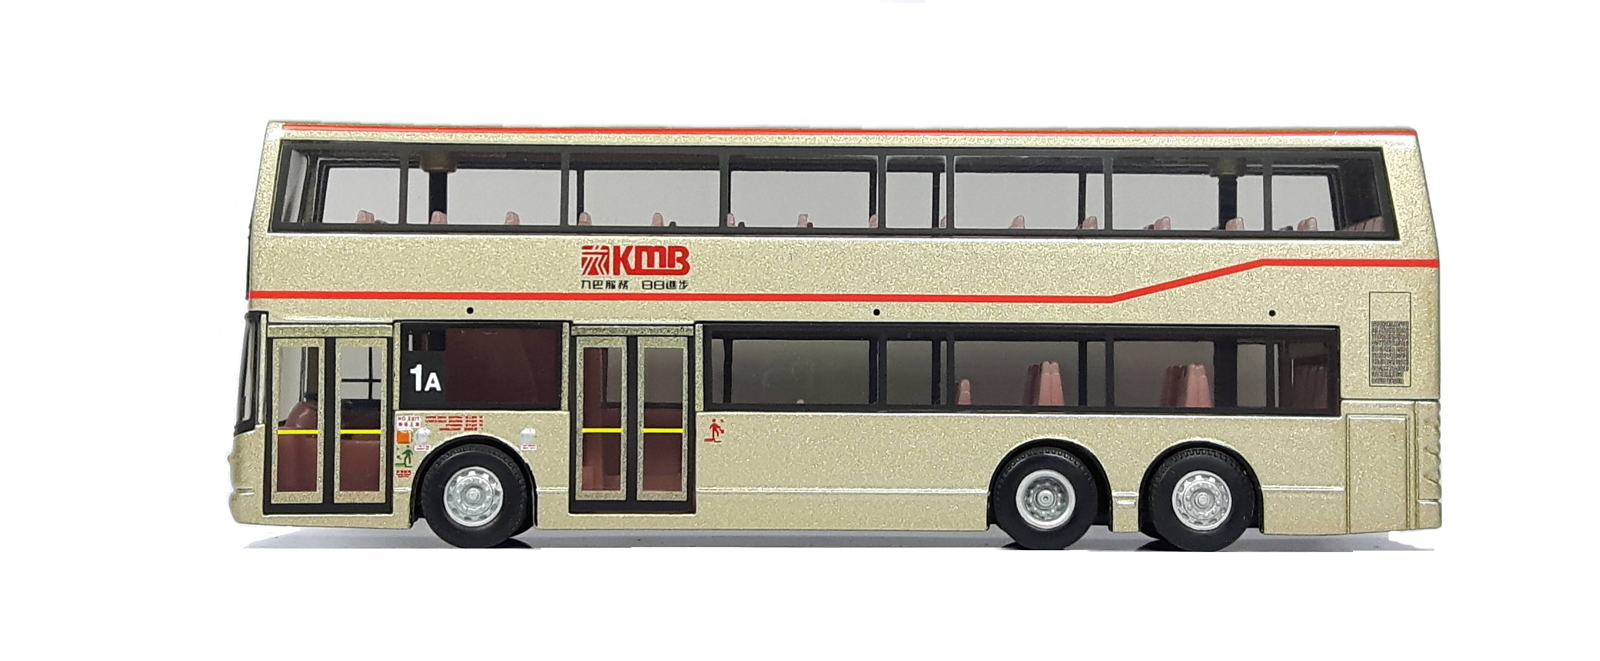 XTRA - A selection of bus types new to KMB between 1997 and 2001